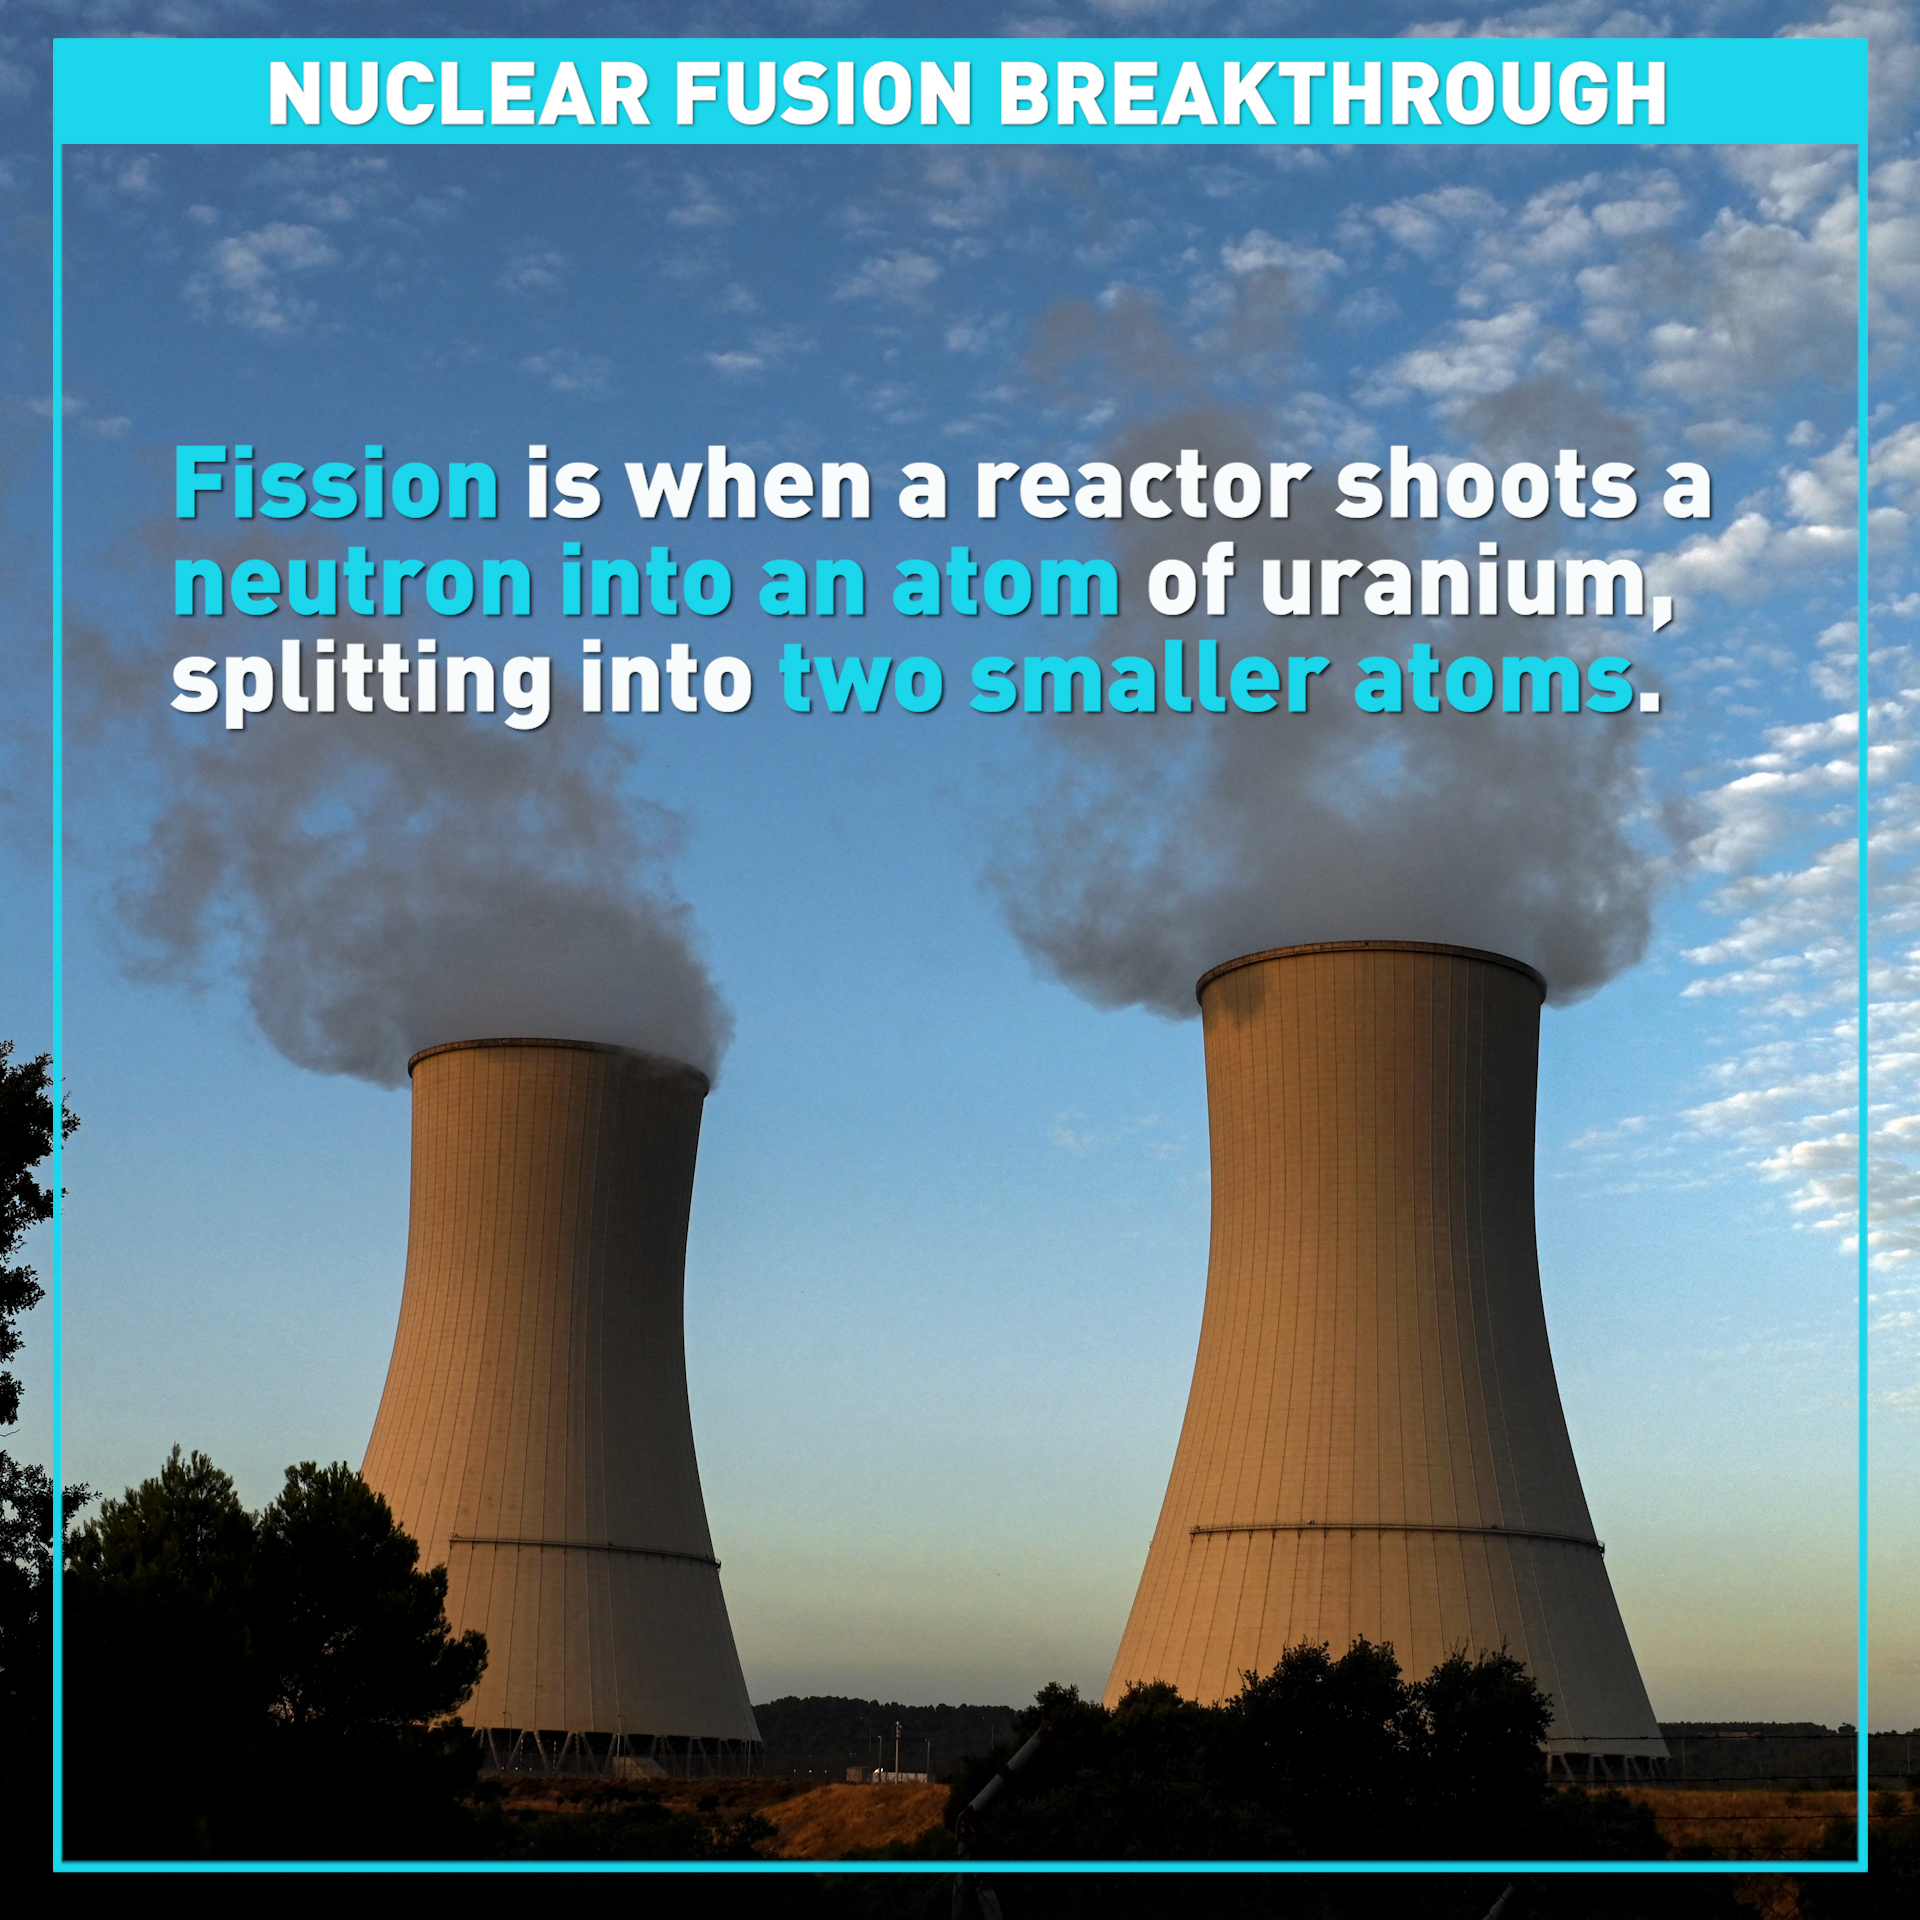 U.S. scientists make breakthrough in nuclear fusion